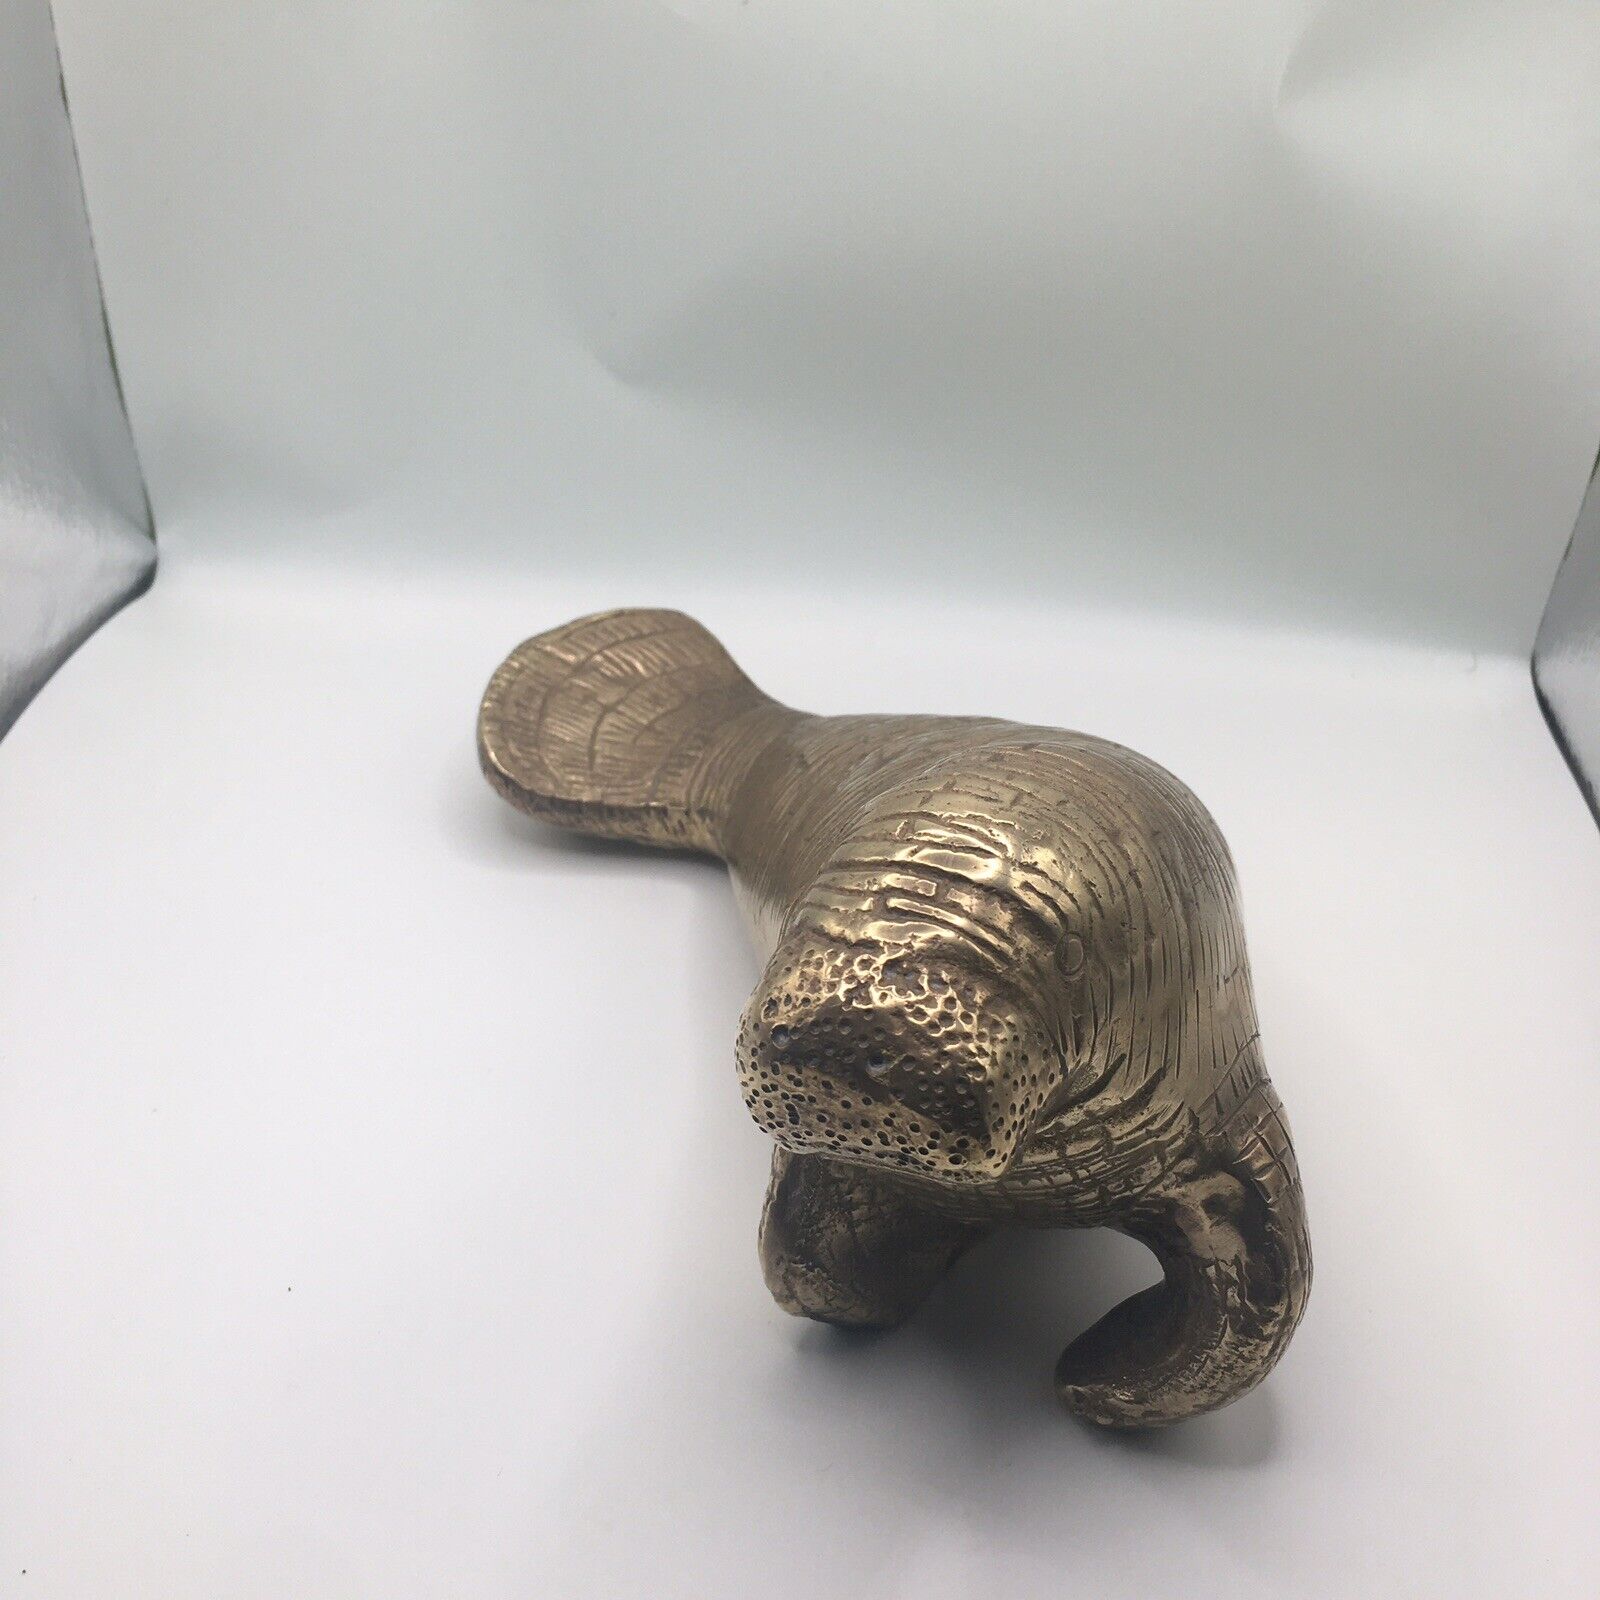 Vintage Brass Manatee Figurine Paperweight 4.12 pounds 9.5 Inches Long